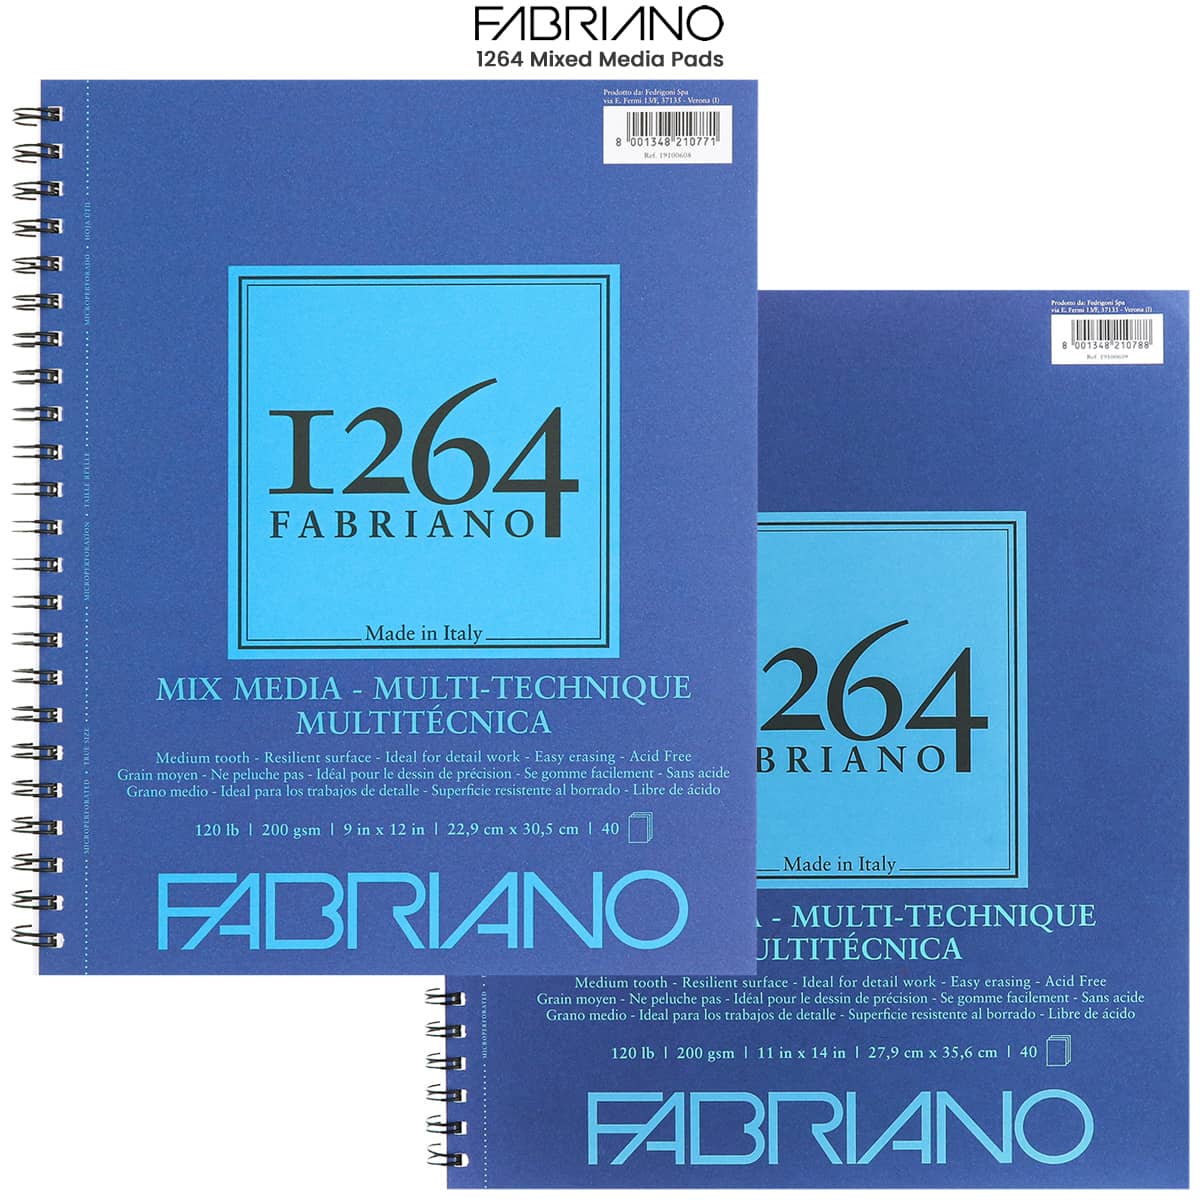 Fabriano 1264 Sketch Pad, Glue Bound, 18”x24”, 60 lb, 100 Sheets, 100%  Alpha-Cellulose, Sketching & Drafting 